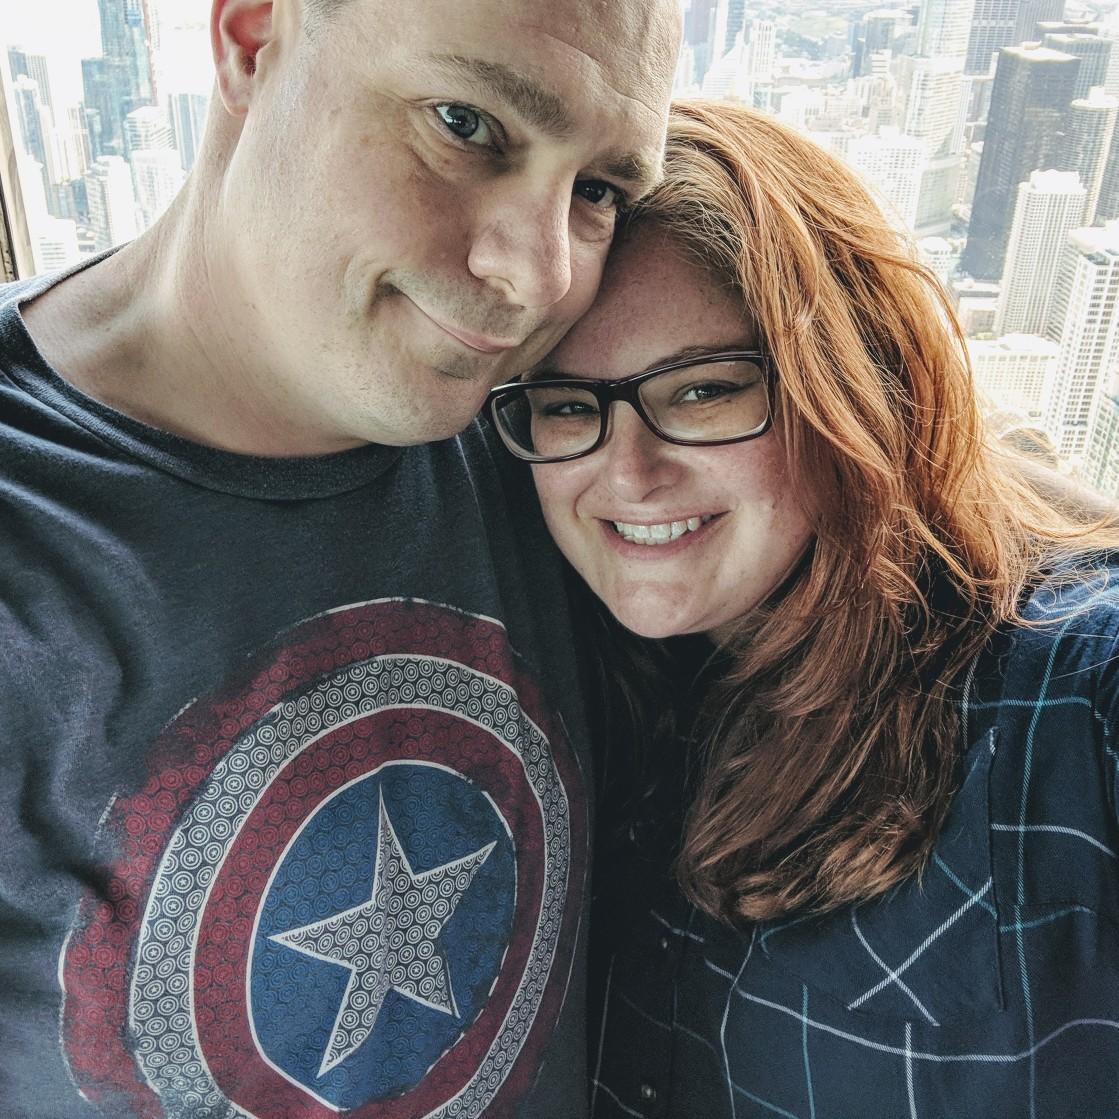 Our first trip together, Chicago, doing lots of touristy things.